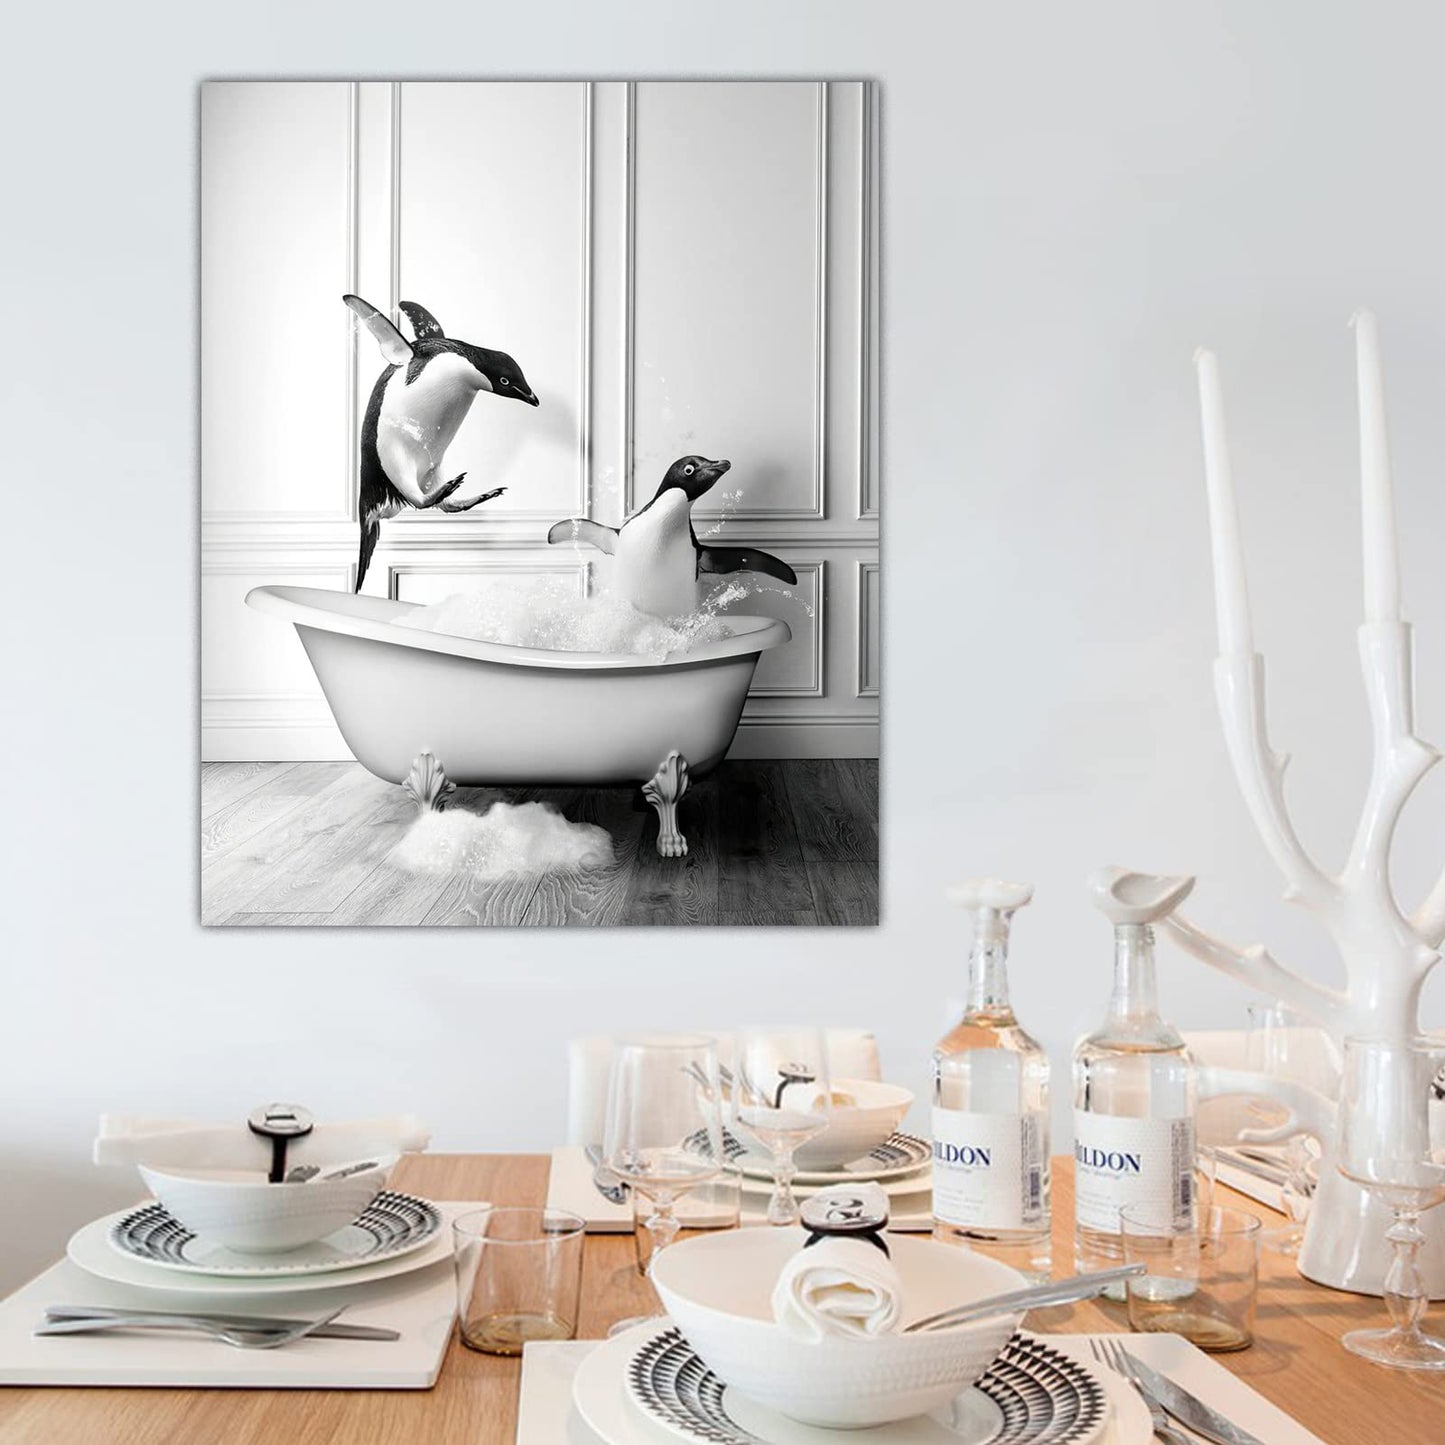 Penguin In Bathtub Canvas Wall Art - Bathroom Art Wall Decor - Animal Print Painting Picture - Black and White Artwork Poster No Frame (9x12in/23x30cm)